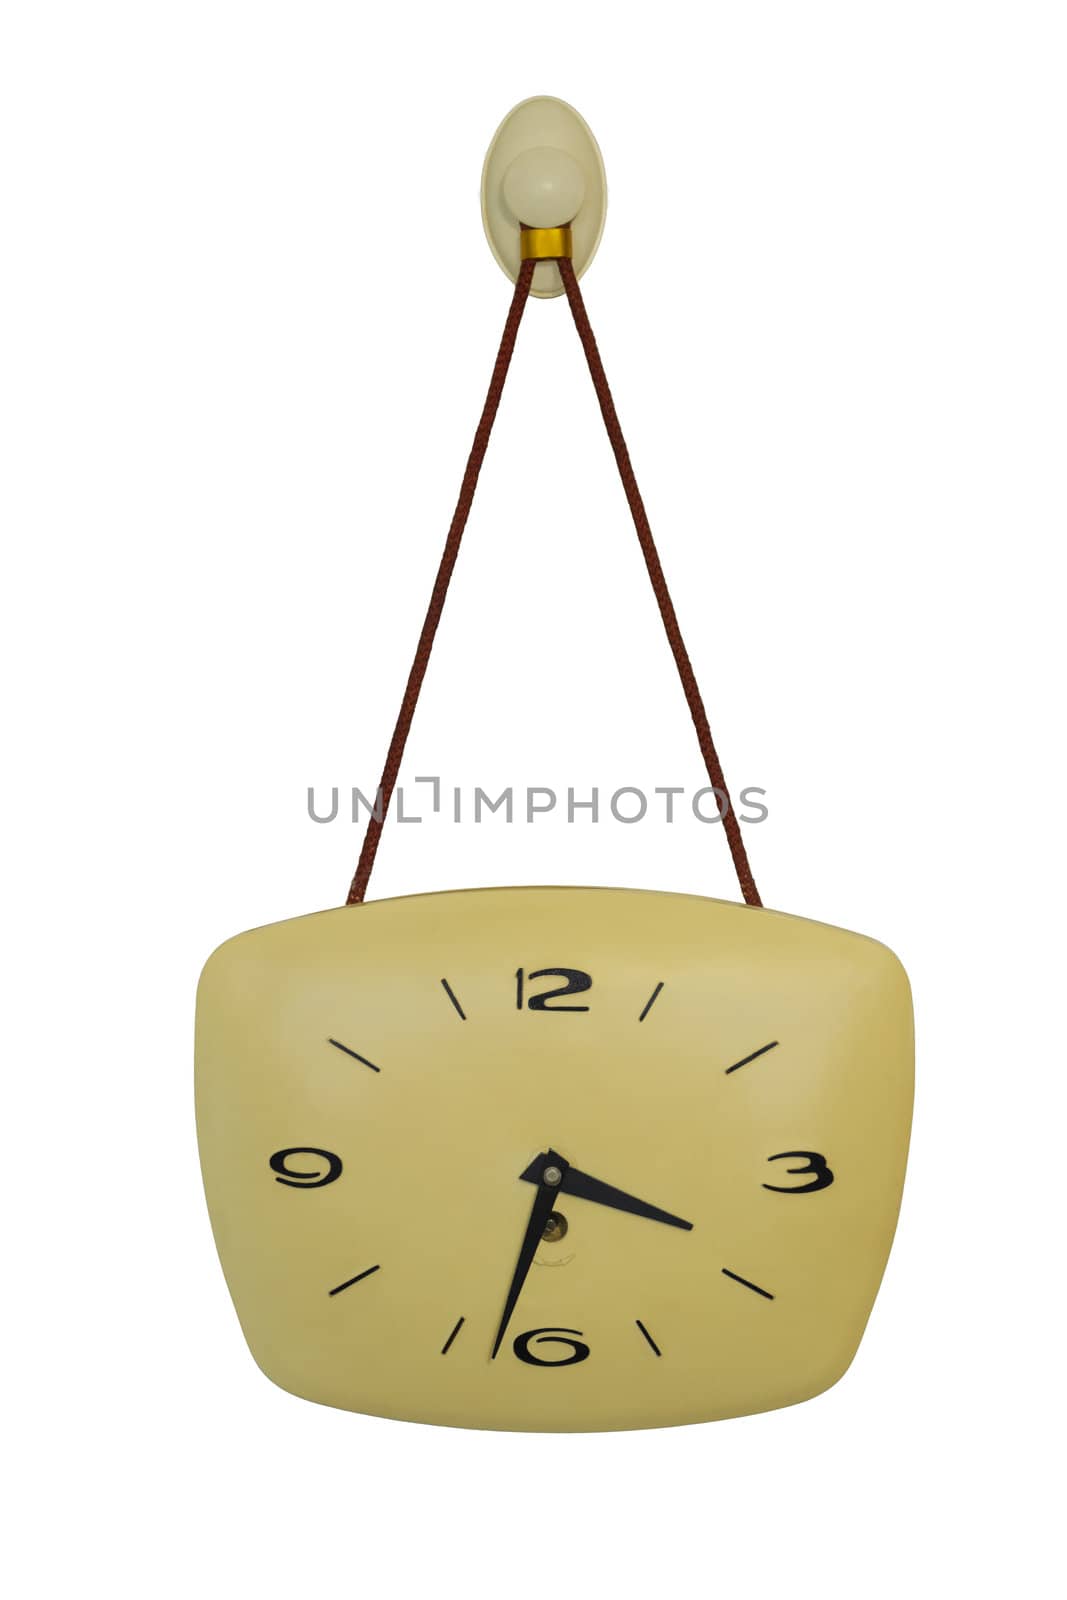 Vintage wall clock. Isolated on white background.